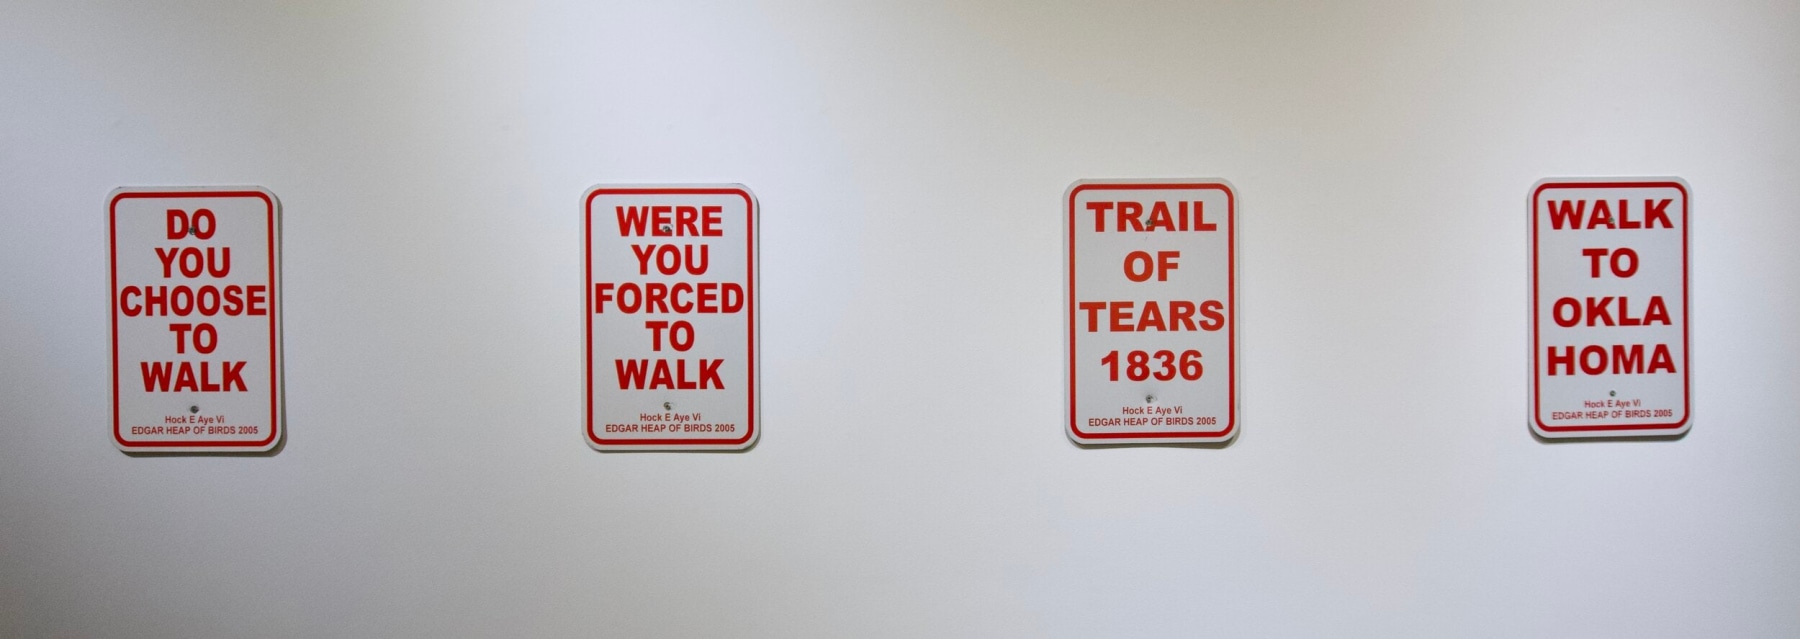 Trail of Tears, 2005
4 aluminum panels
18 x 109.5&amp;nbsp;inches